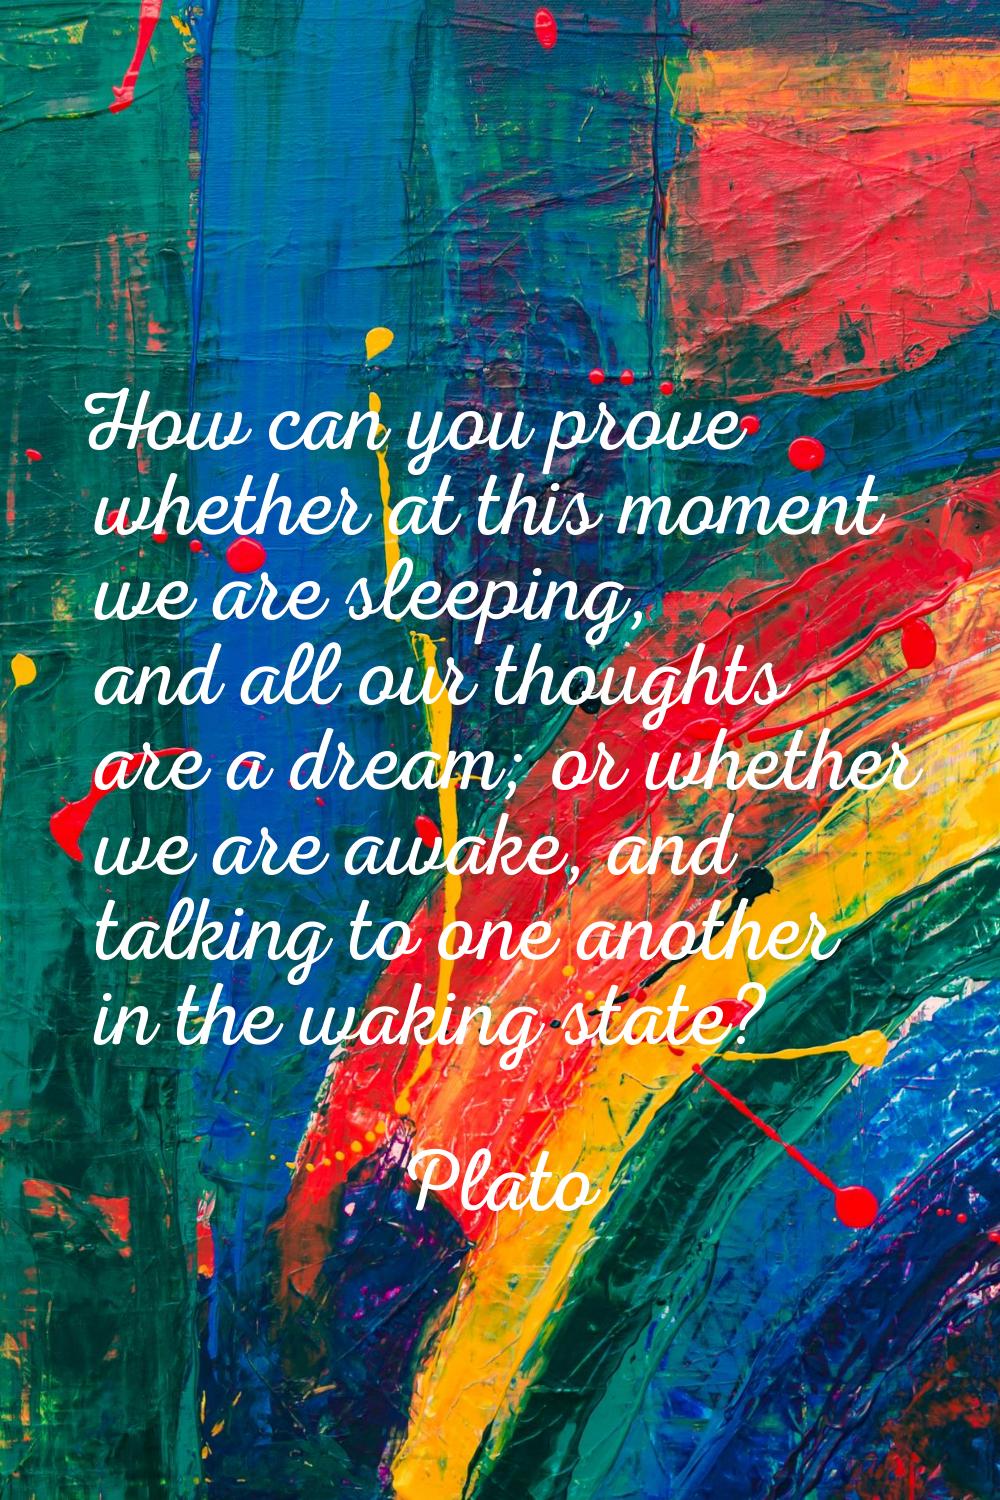 How can you prove whether at this moment we are sleeping, and all our thoughts are a dream; or whet